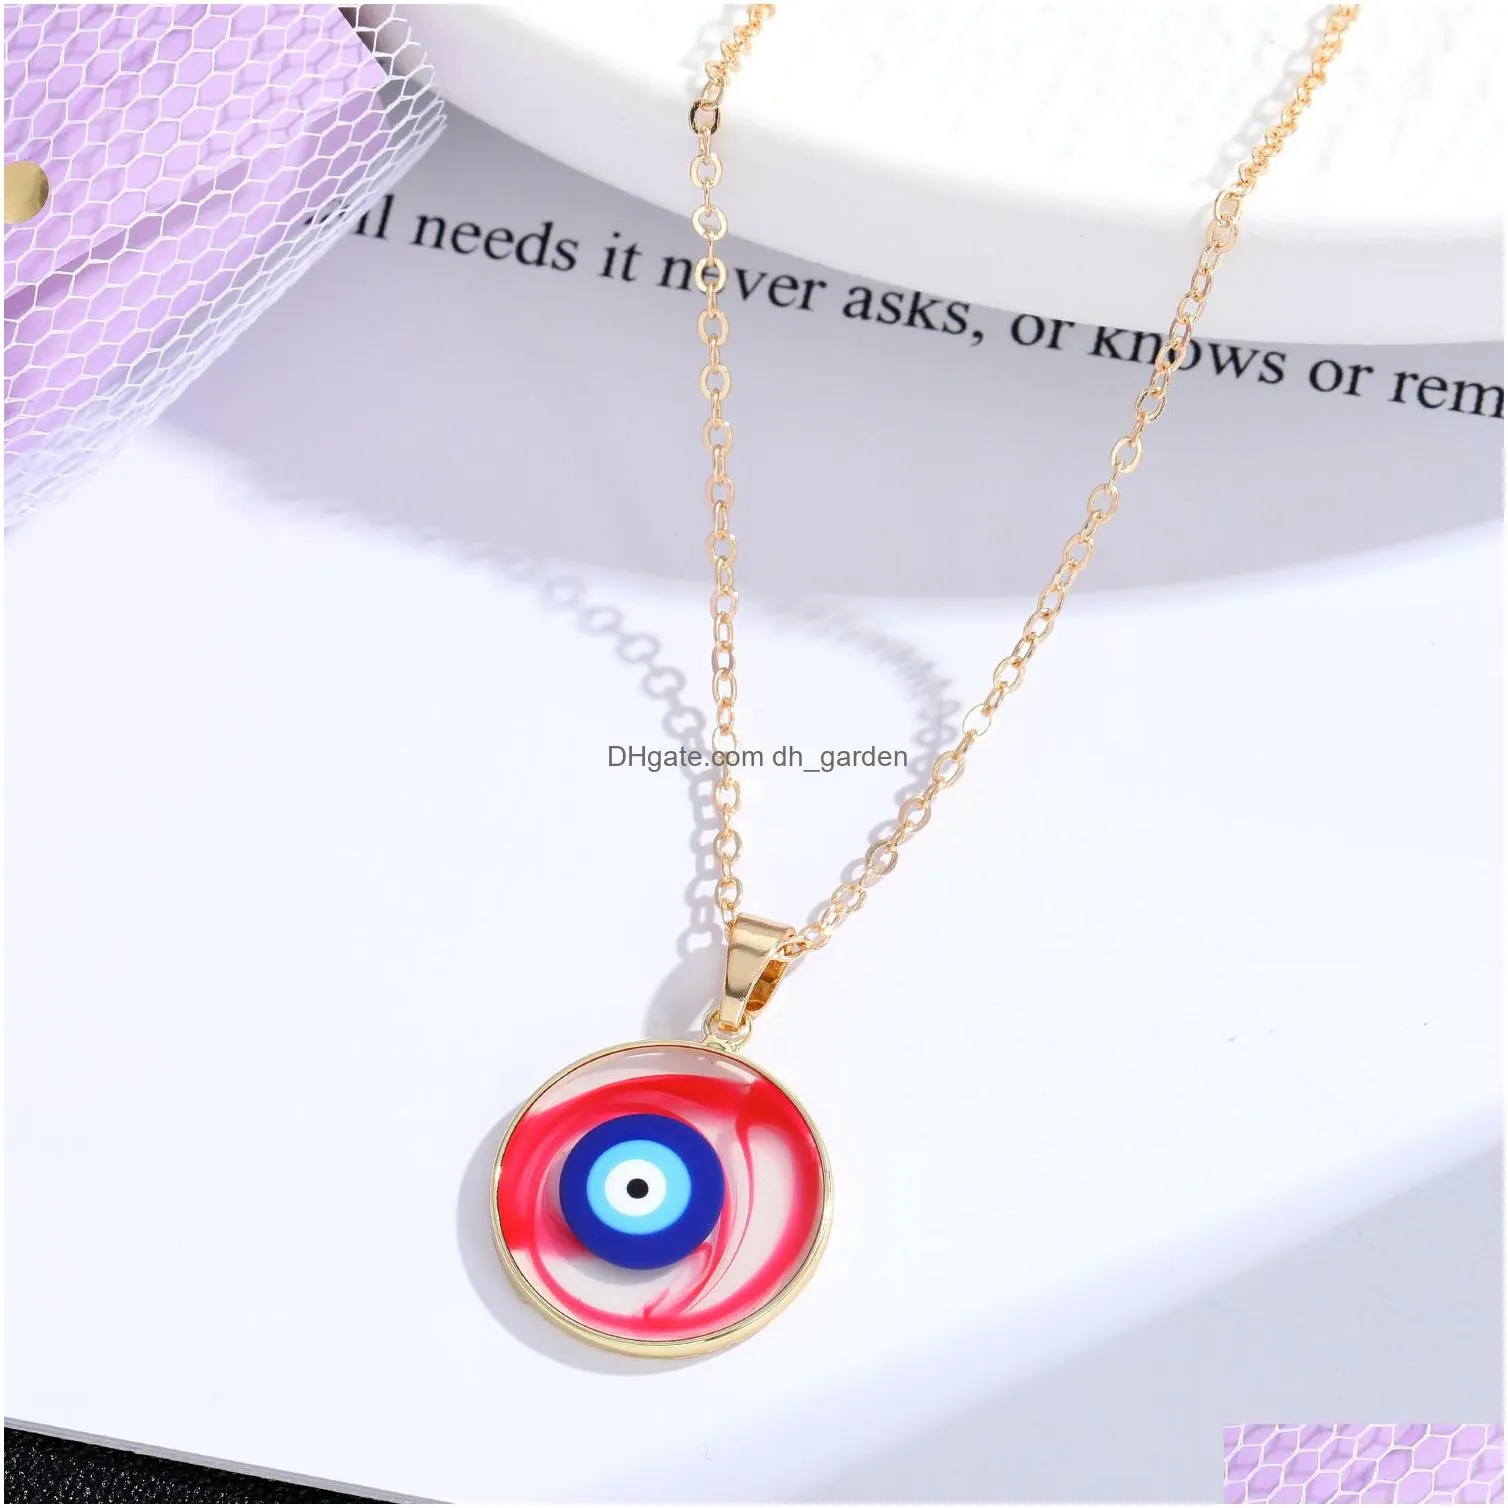 blooming colorful turkish blue evil eye necklace for women new trendy lucky eye clavicle chain choker wedding jewelry